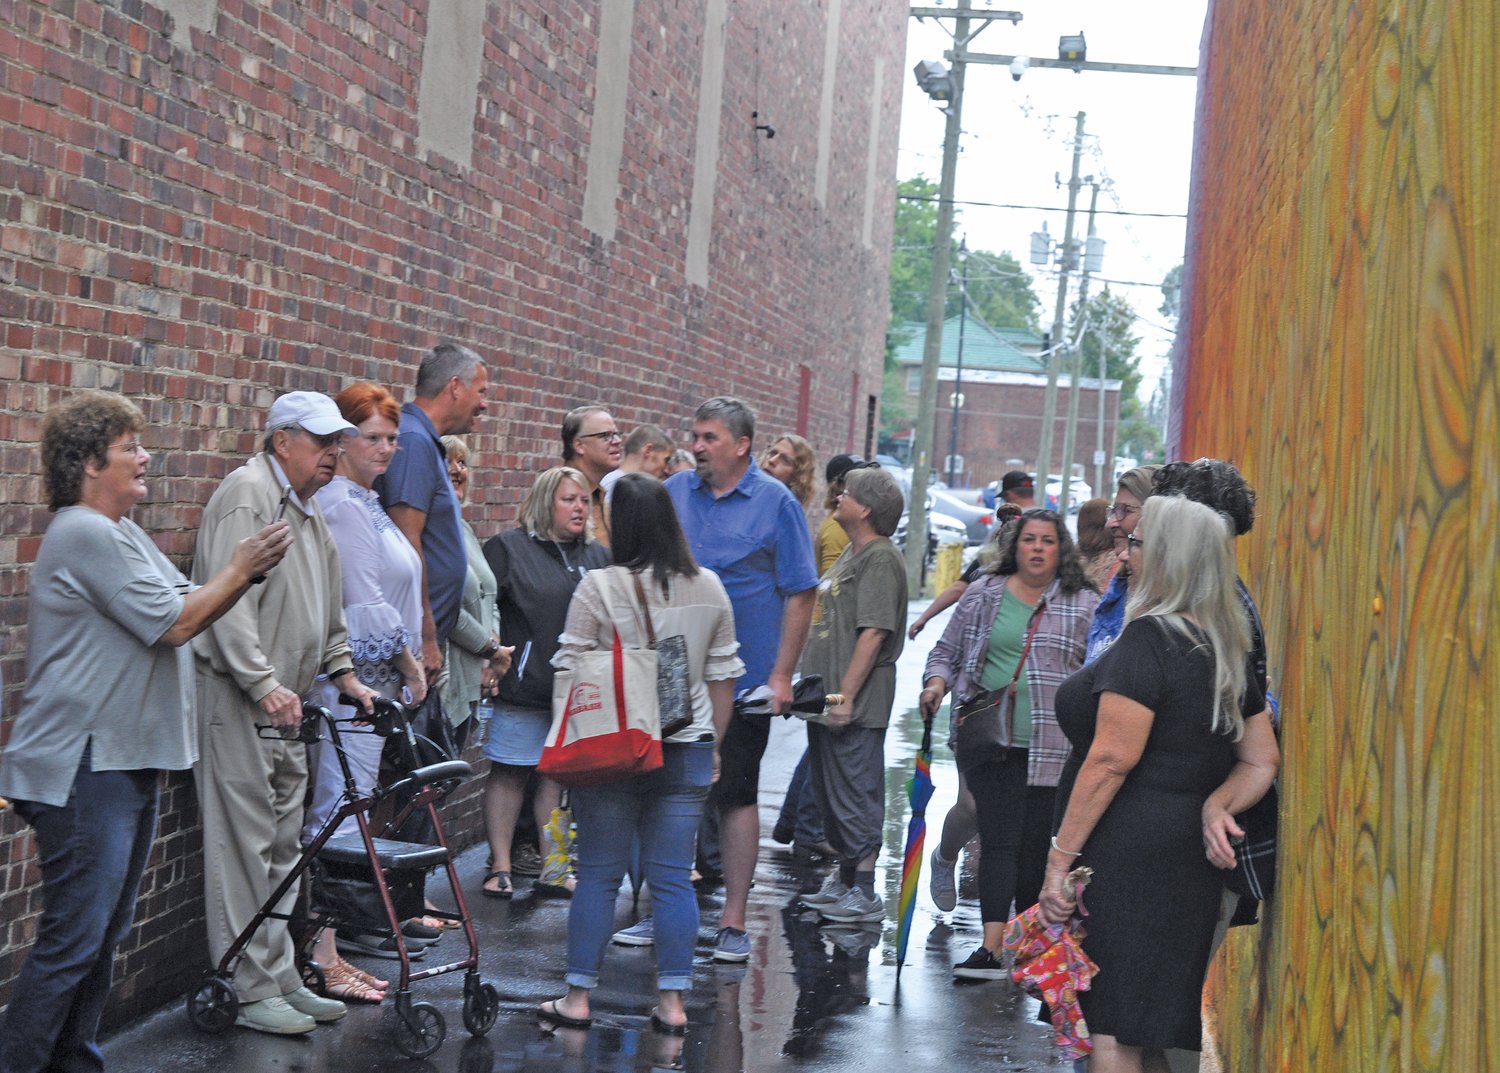 People gather in the alley between the Montgomery County Community Foundation and Milligan